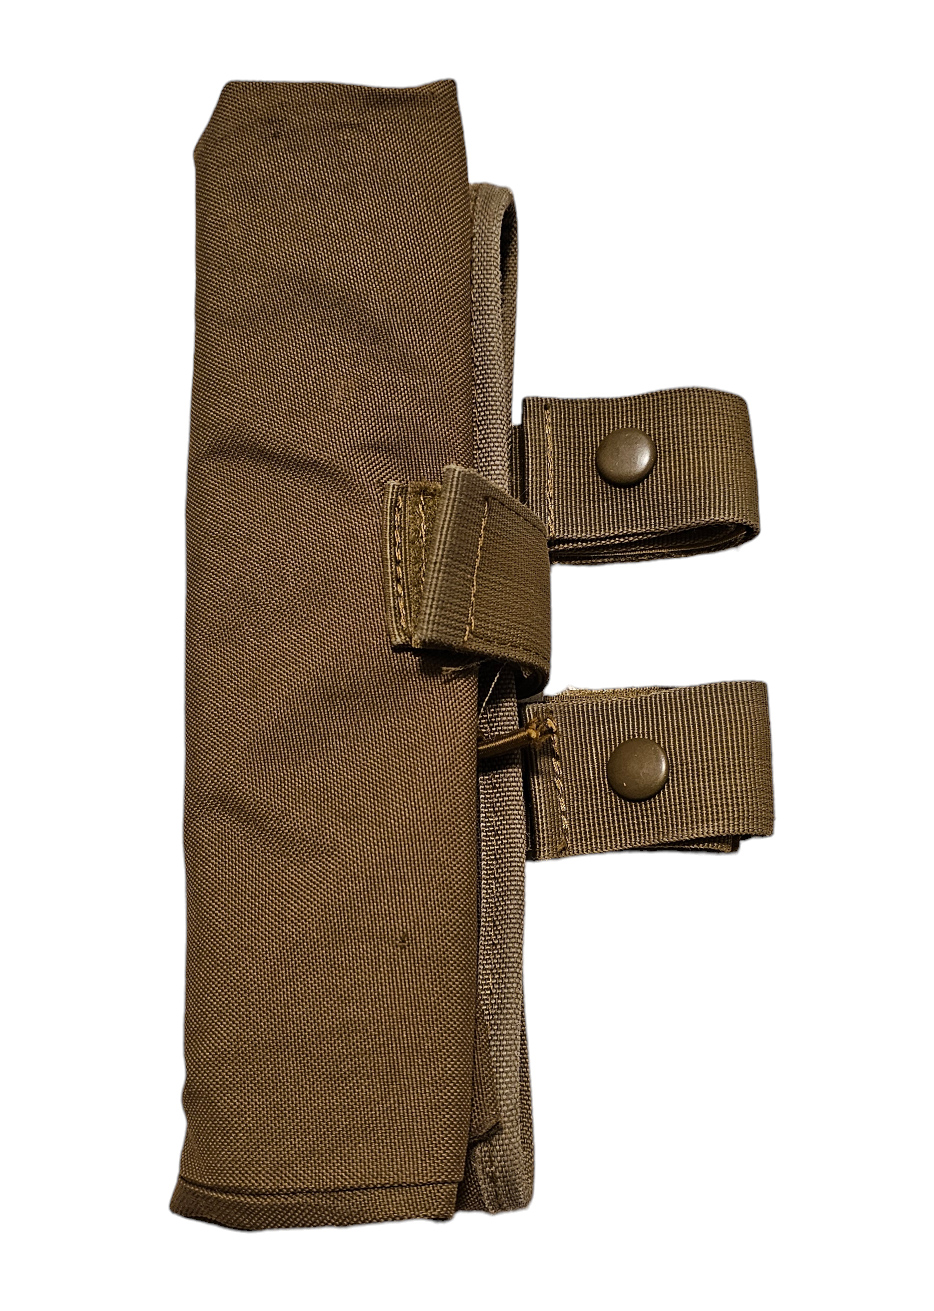 8Fields Dump Pouch, Coyote Brown - USED